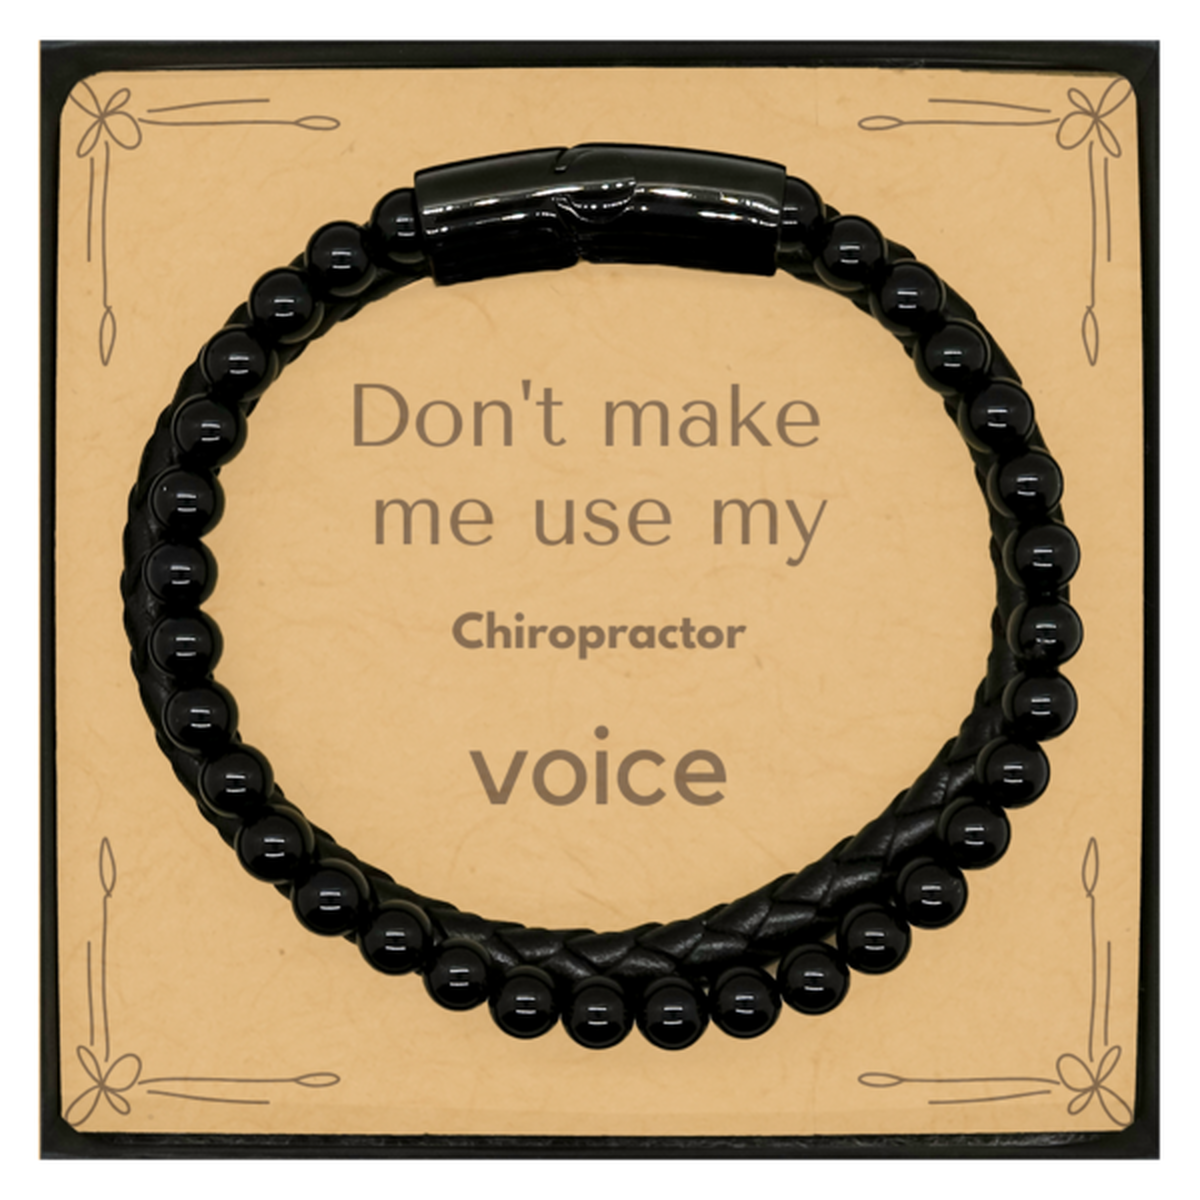 Don't make me use my Chiropractor voice, Sarcasm Chiropractor Card Gifts, Christmas Chiropractor Stone Leather Bracelets Birthday Unique Gifts For Chiropractor Coworkers, Men, Women, Colleague, Friends